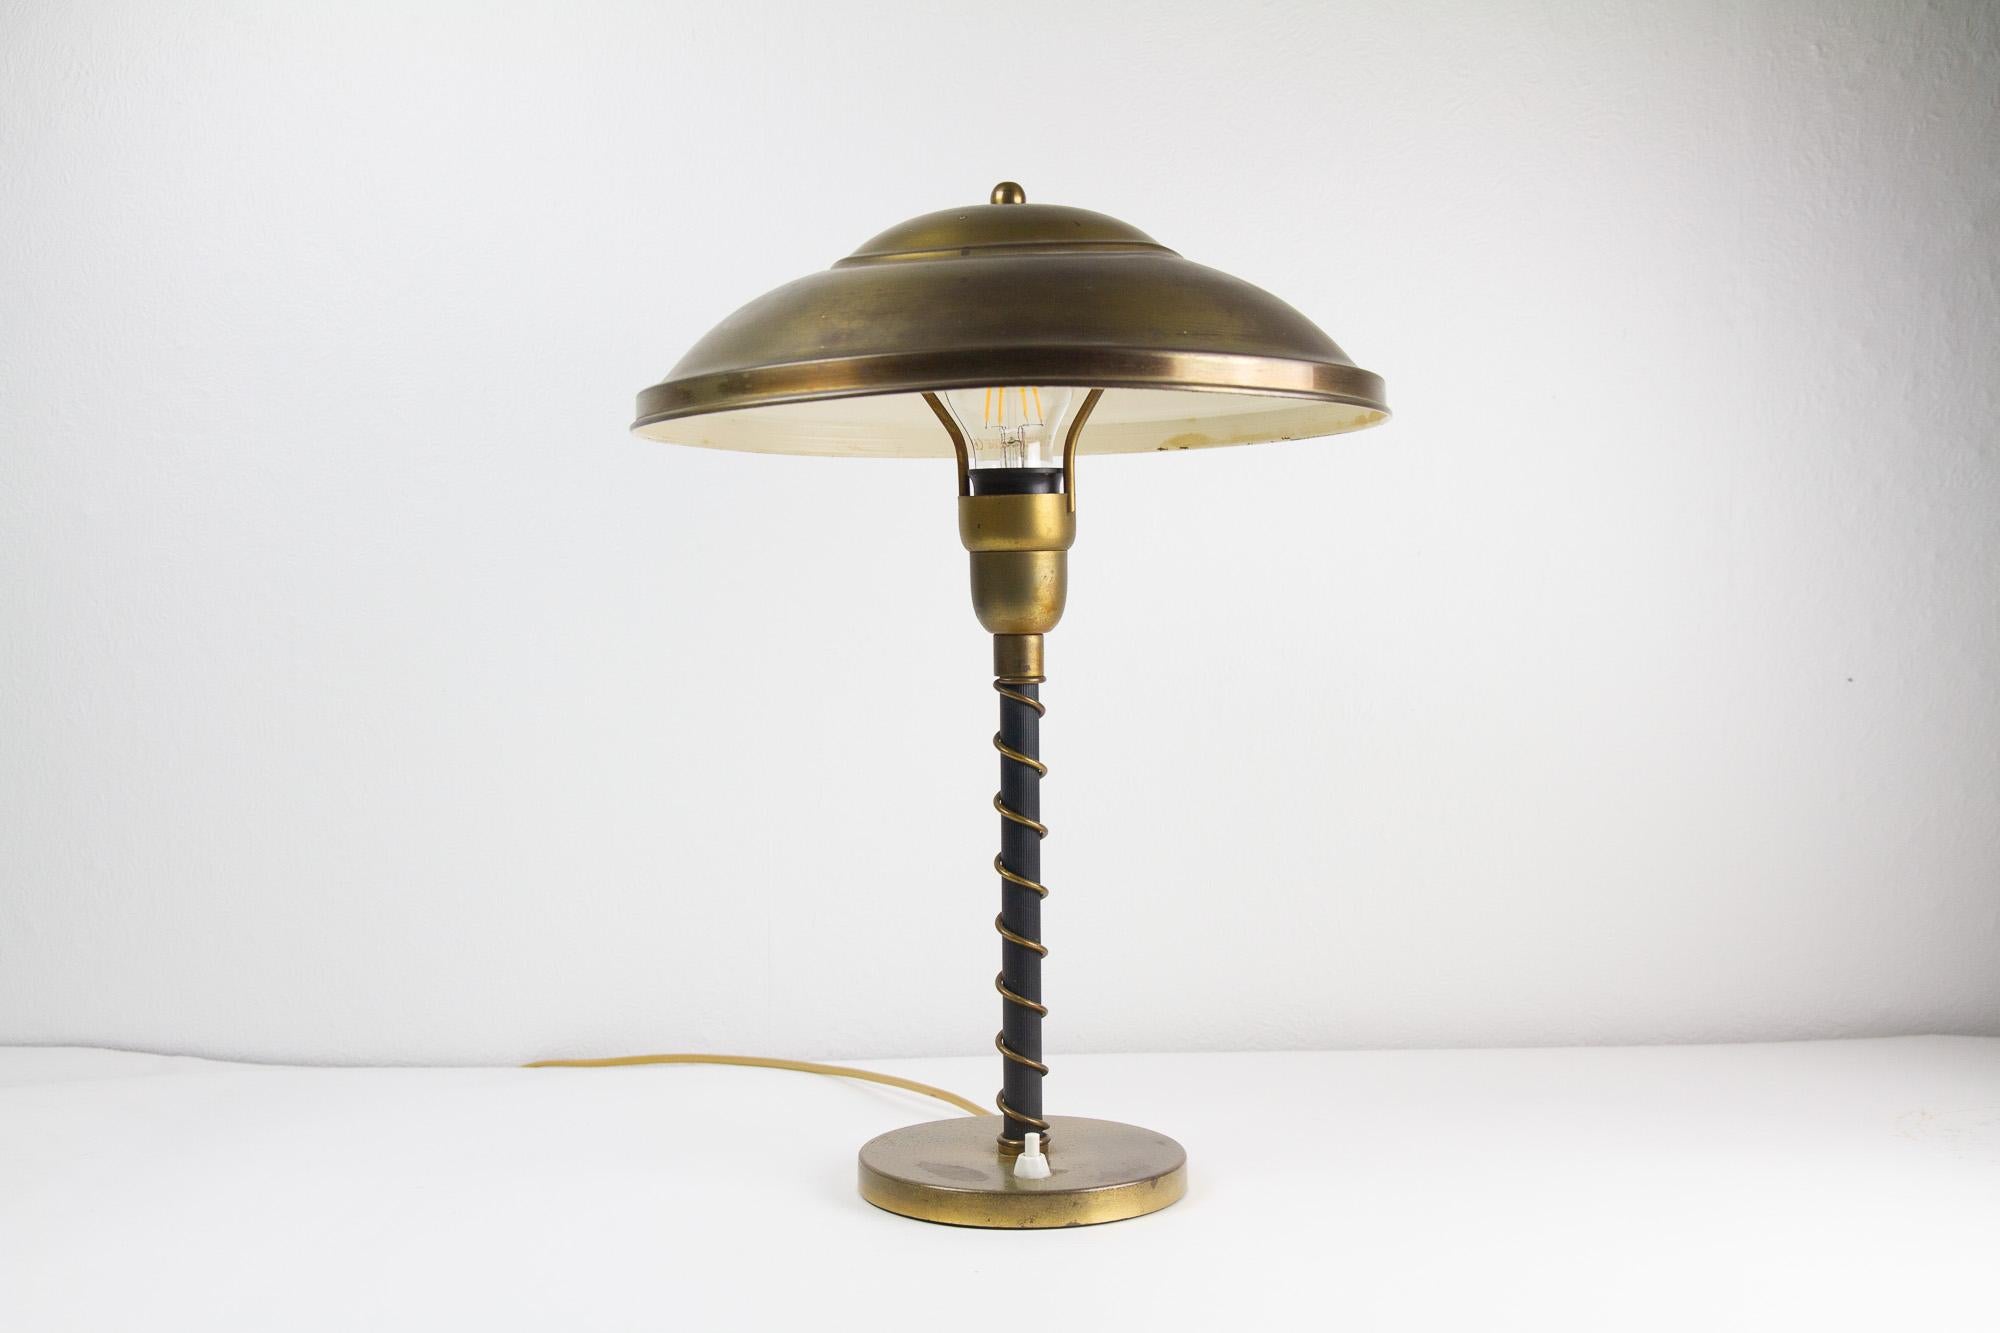 Danish Art Deco Brass Table Lamp, 1930s.
Dome brass shade and base with switch. Black stem with twisted brass wire.
Beautiful patina on brass parts.
E26/27 socket. Working order.
Good original condition.